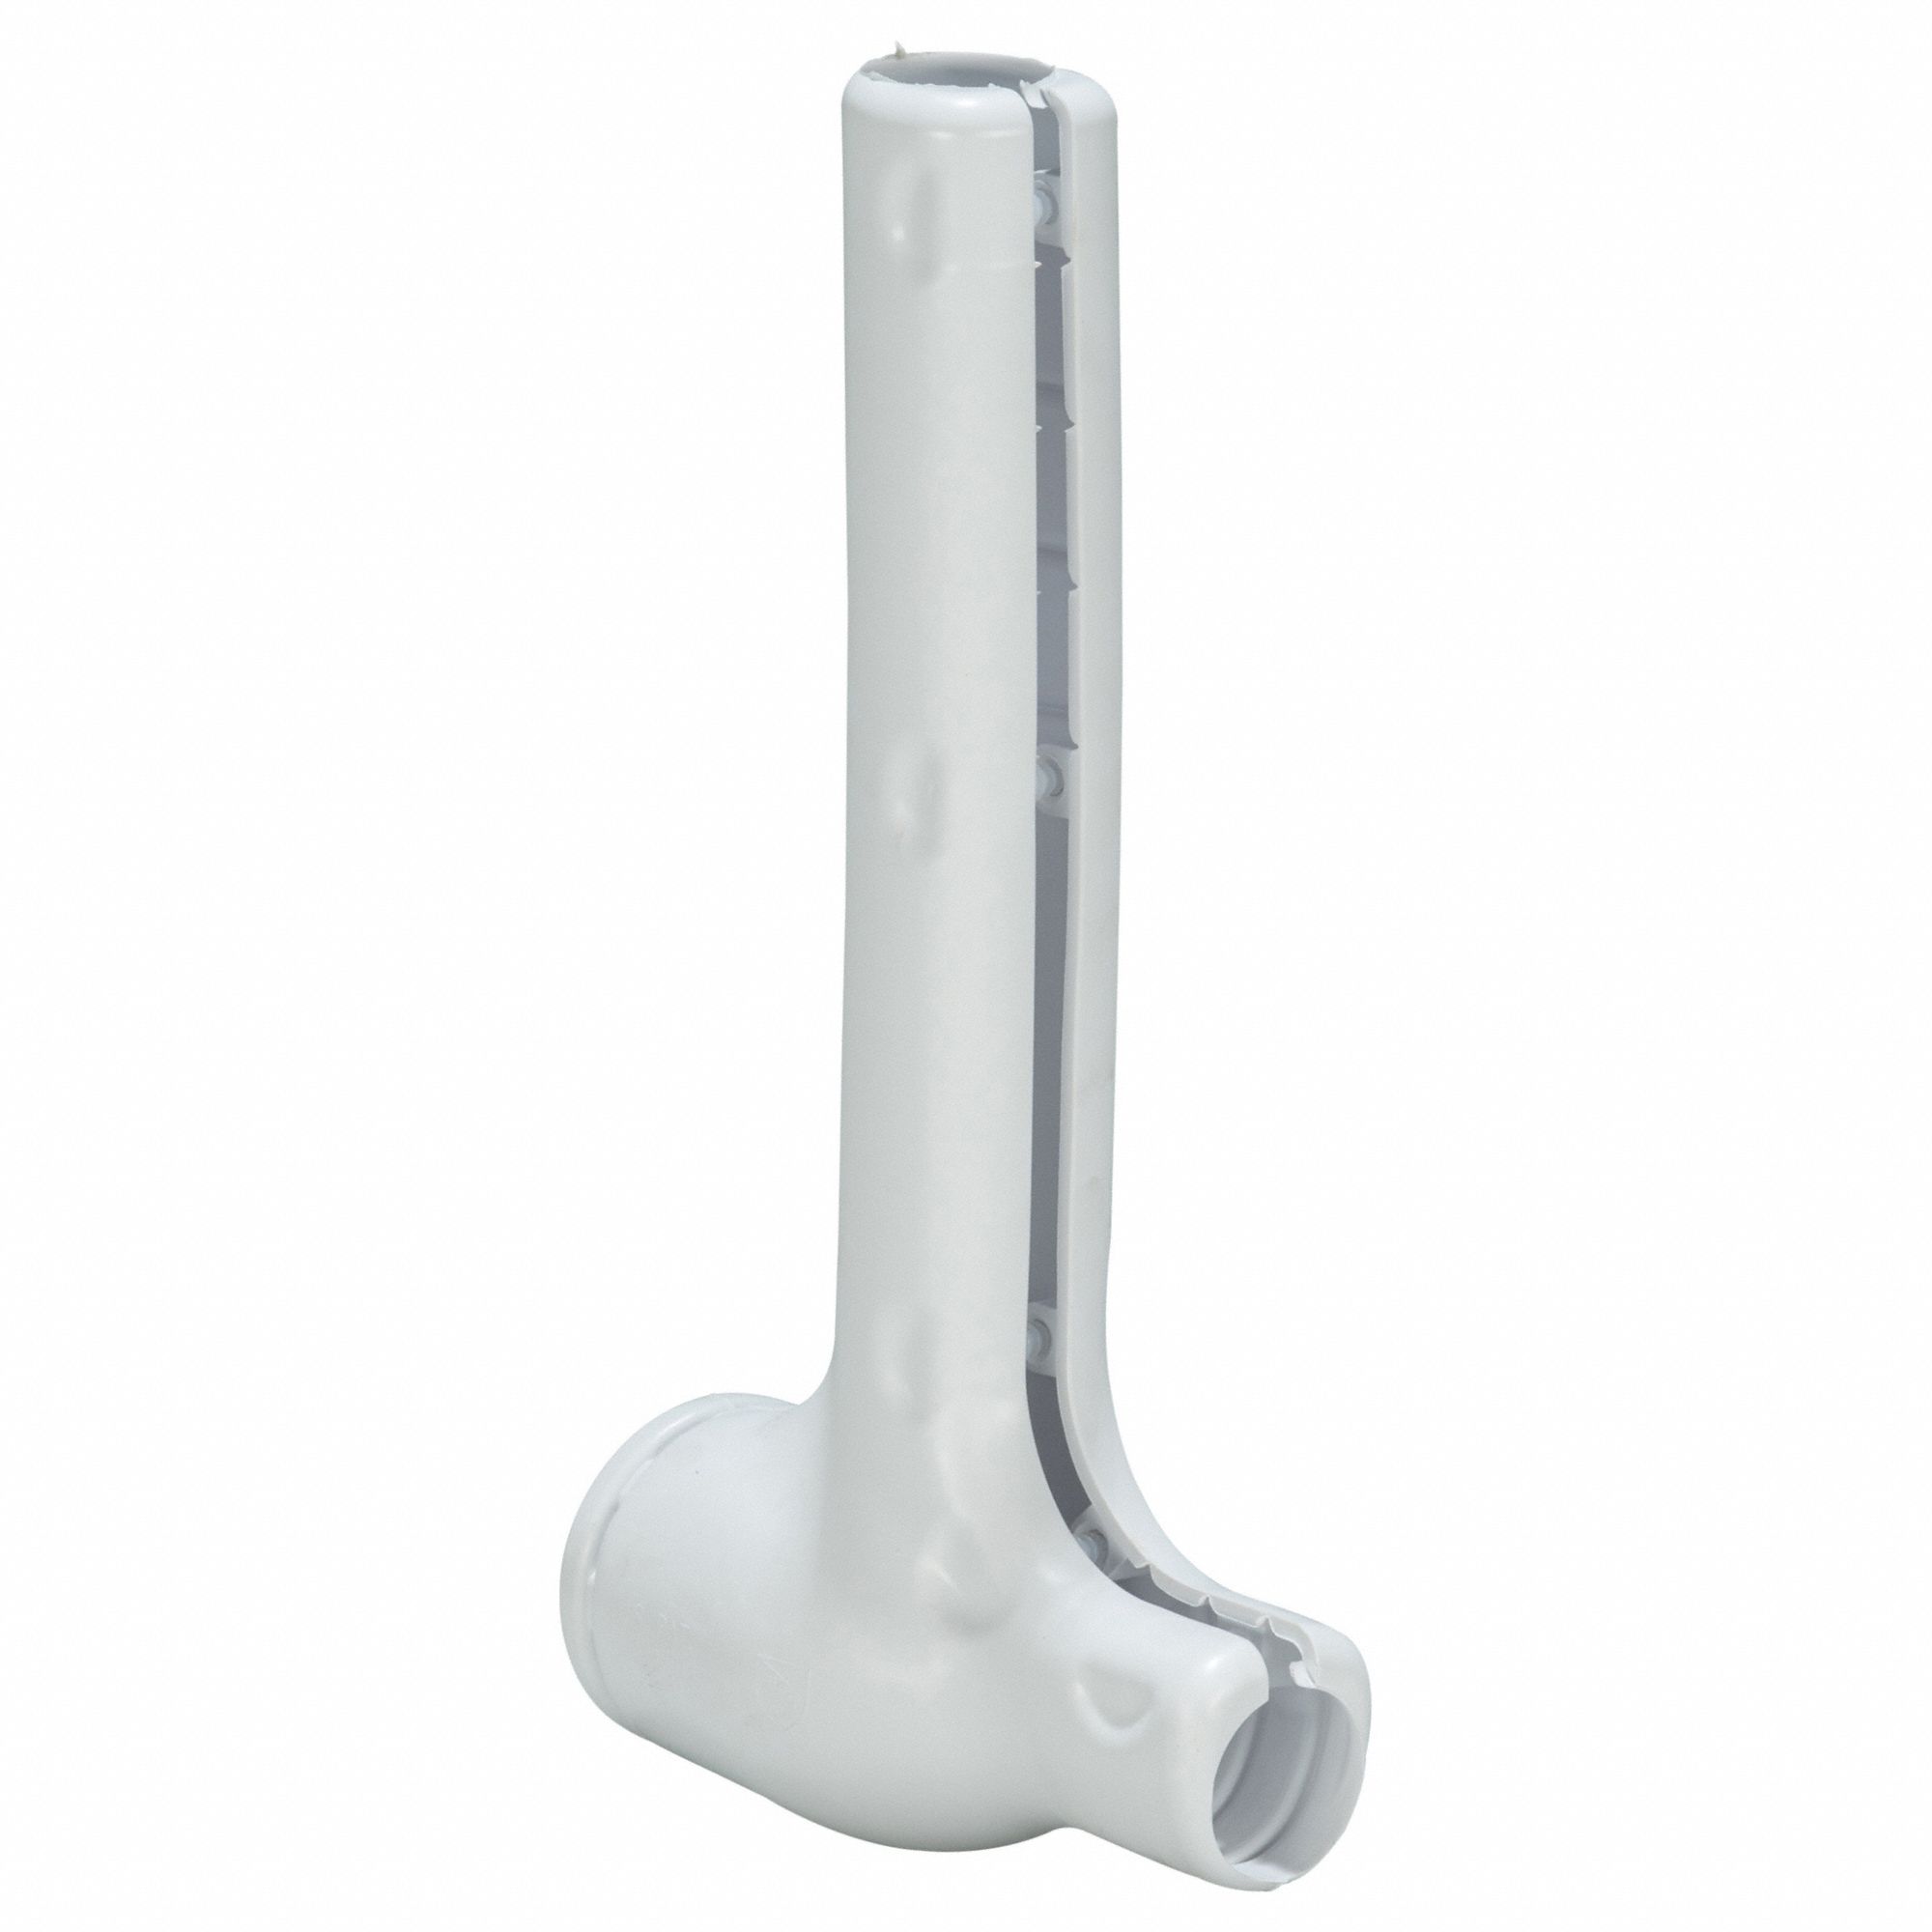 Angle Valve And Supply Cover: Vinyl, White, 1 1/4 in_1 1/2 in Nominal Pipe Size, 1 Pieces